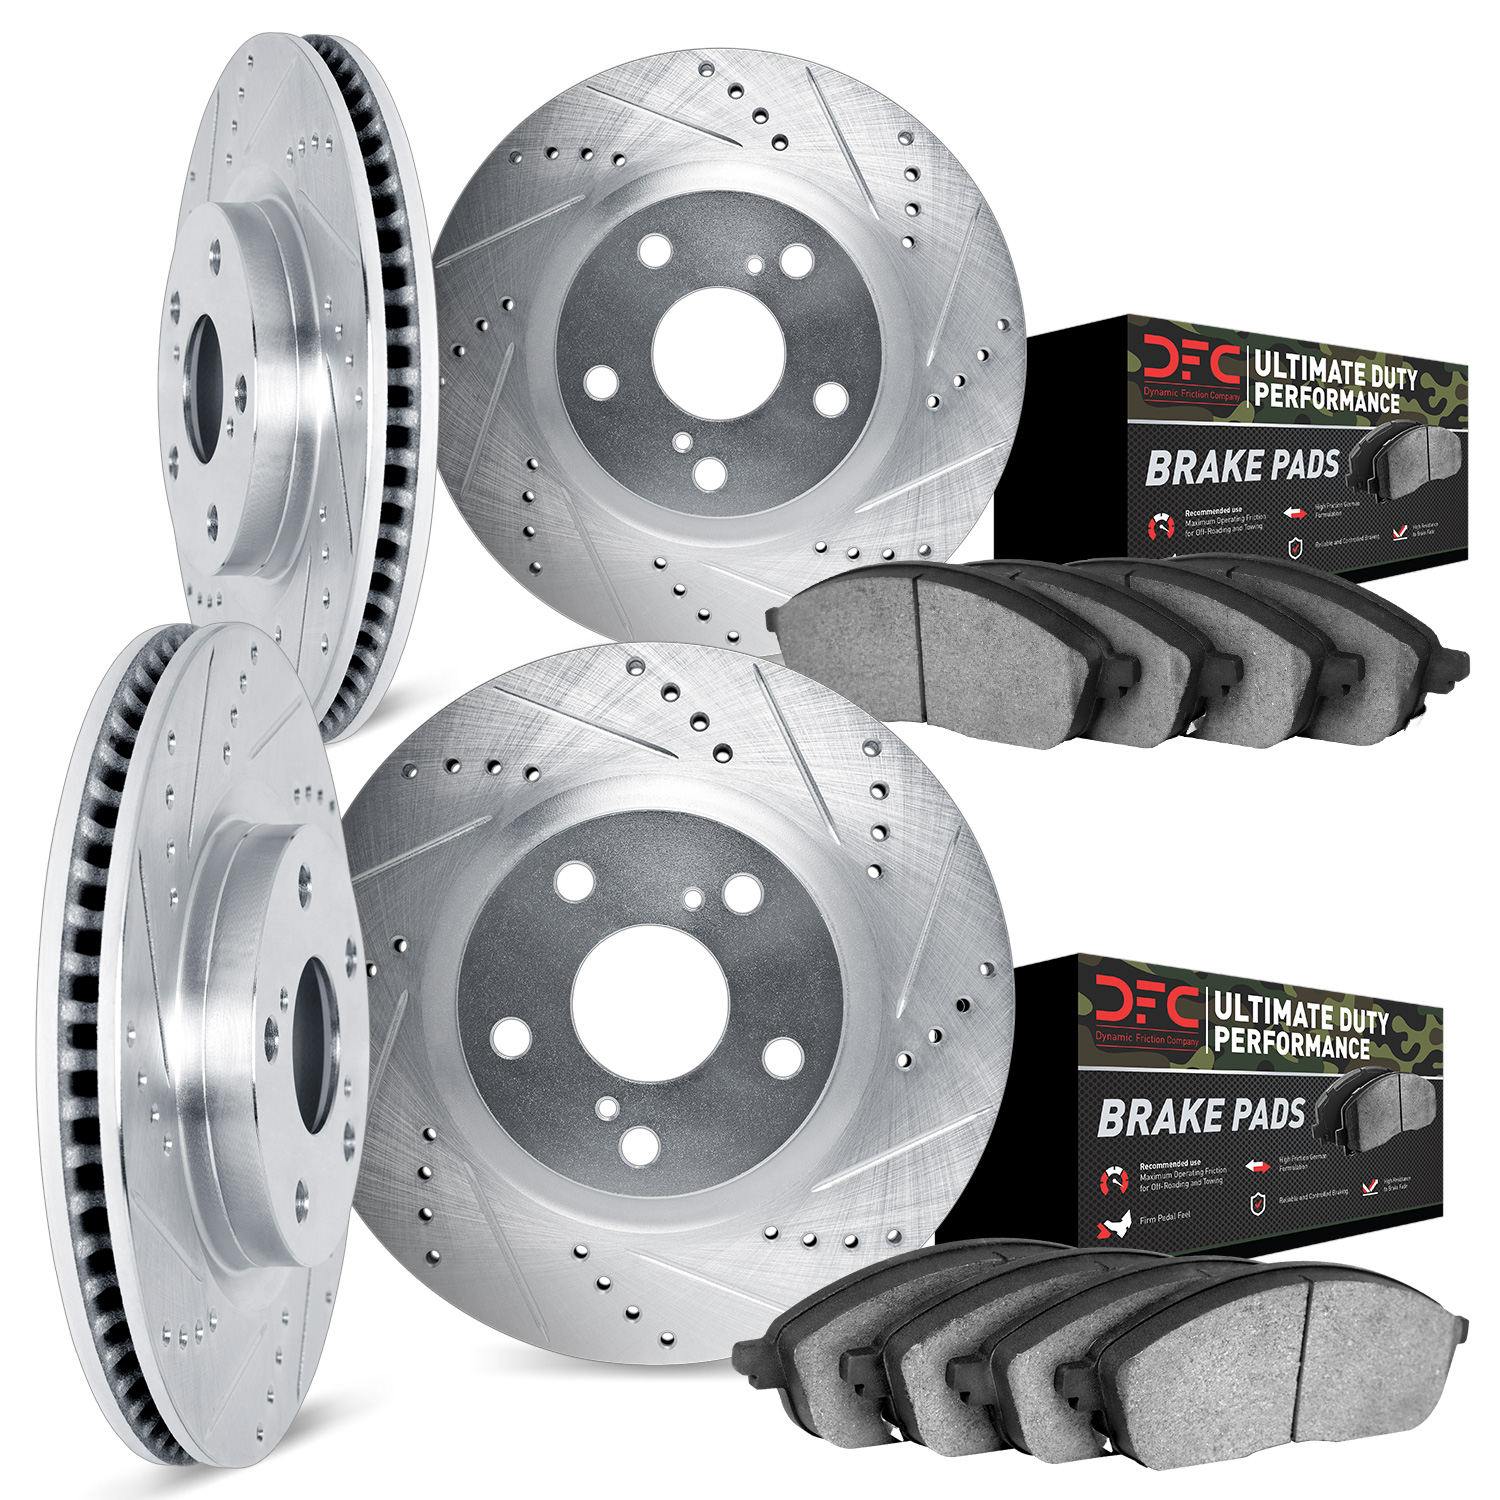 7404-42005 Drilled/Slotted Brake Rotors with Ultimate-Duty Brake Pads Kit [Silver], Fits Select Mopar, Position: Front and Rear